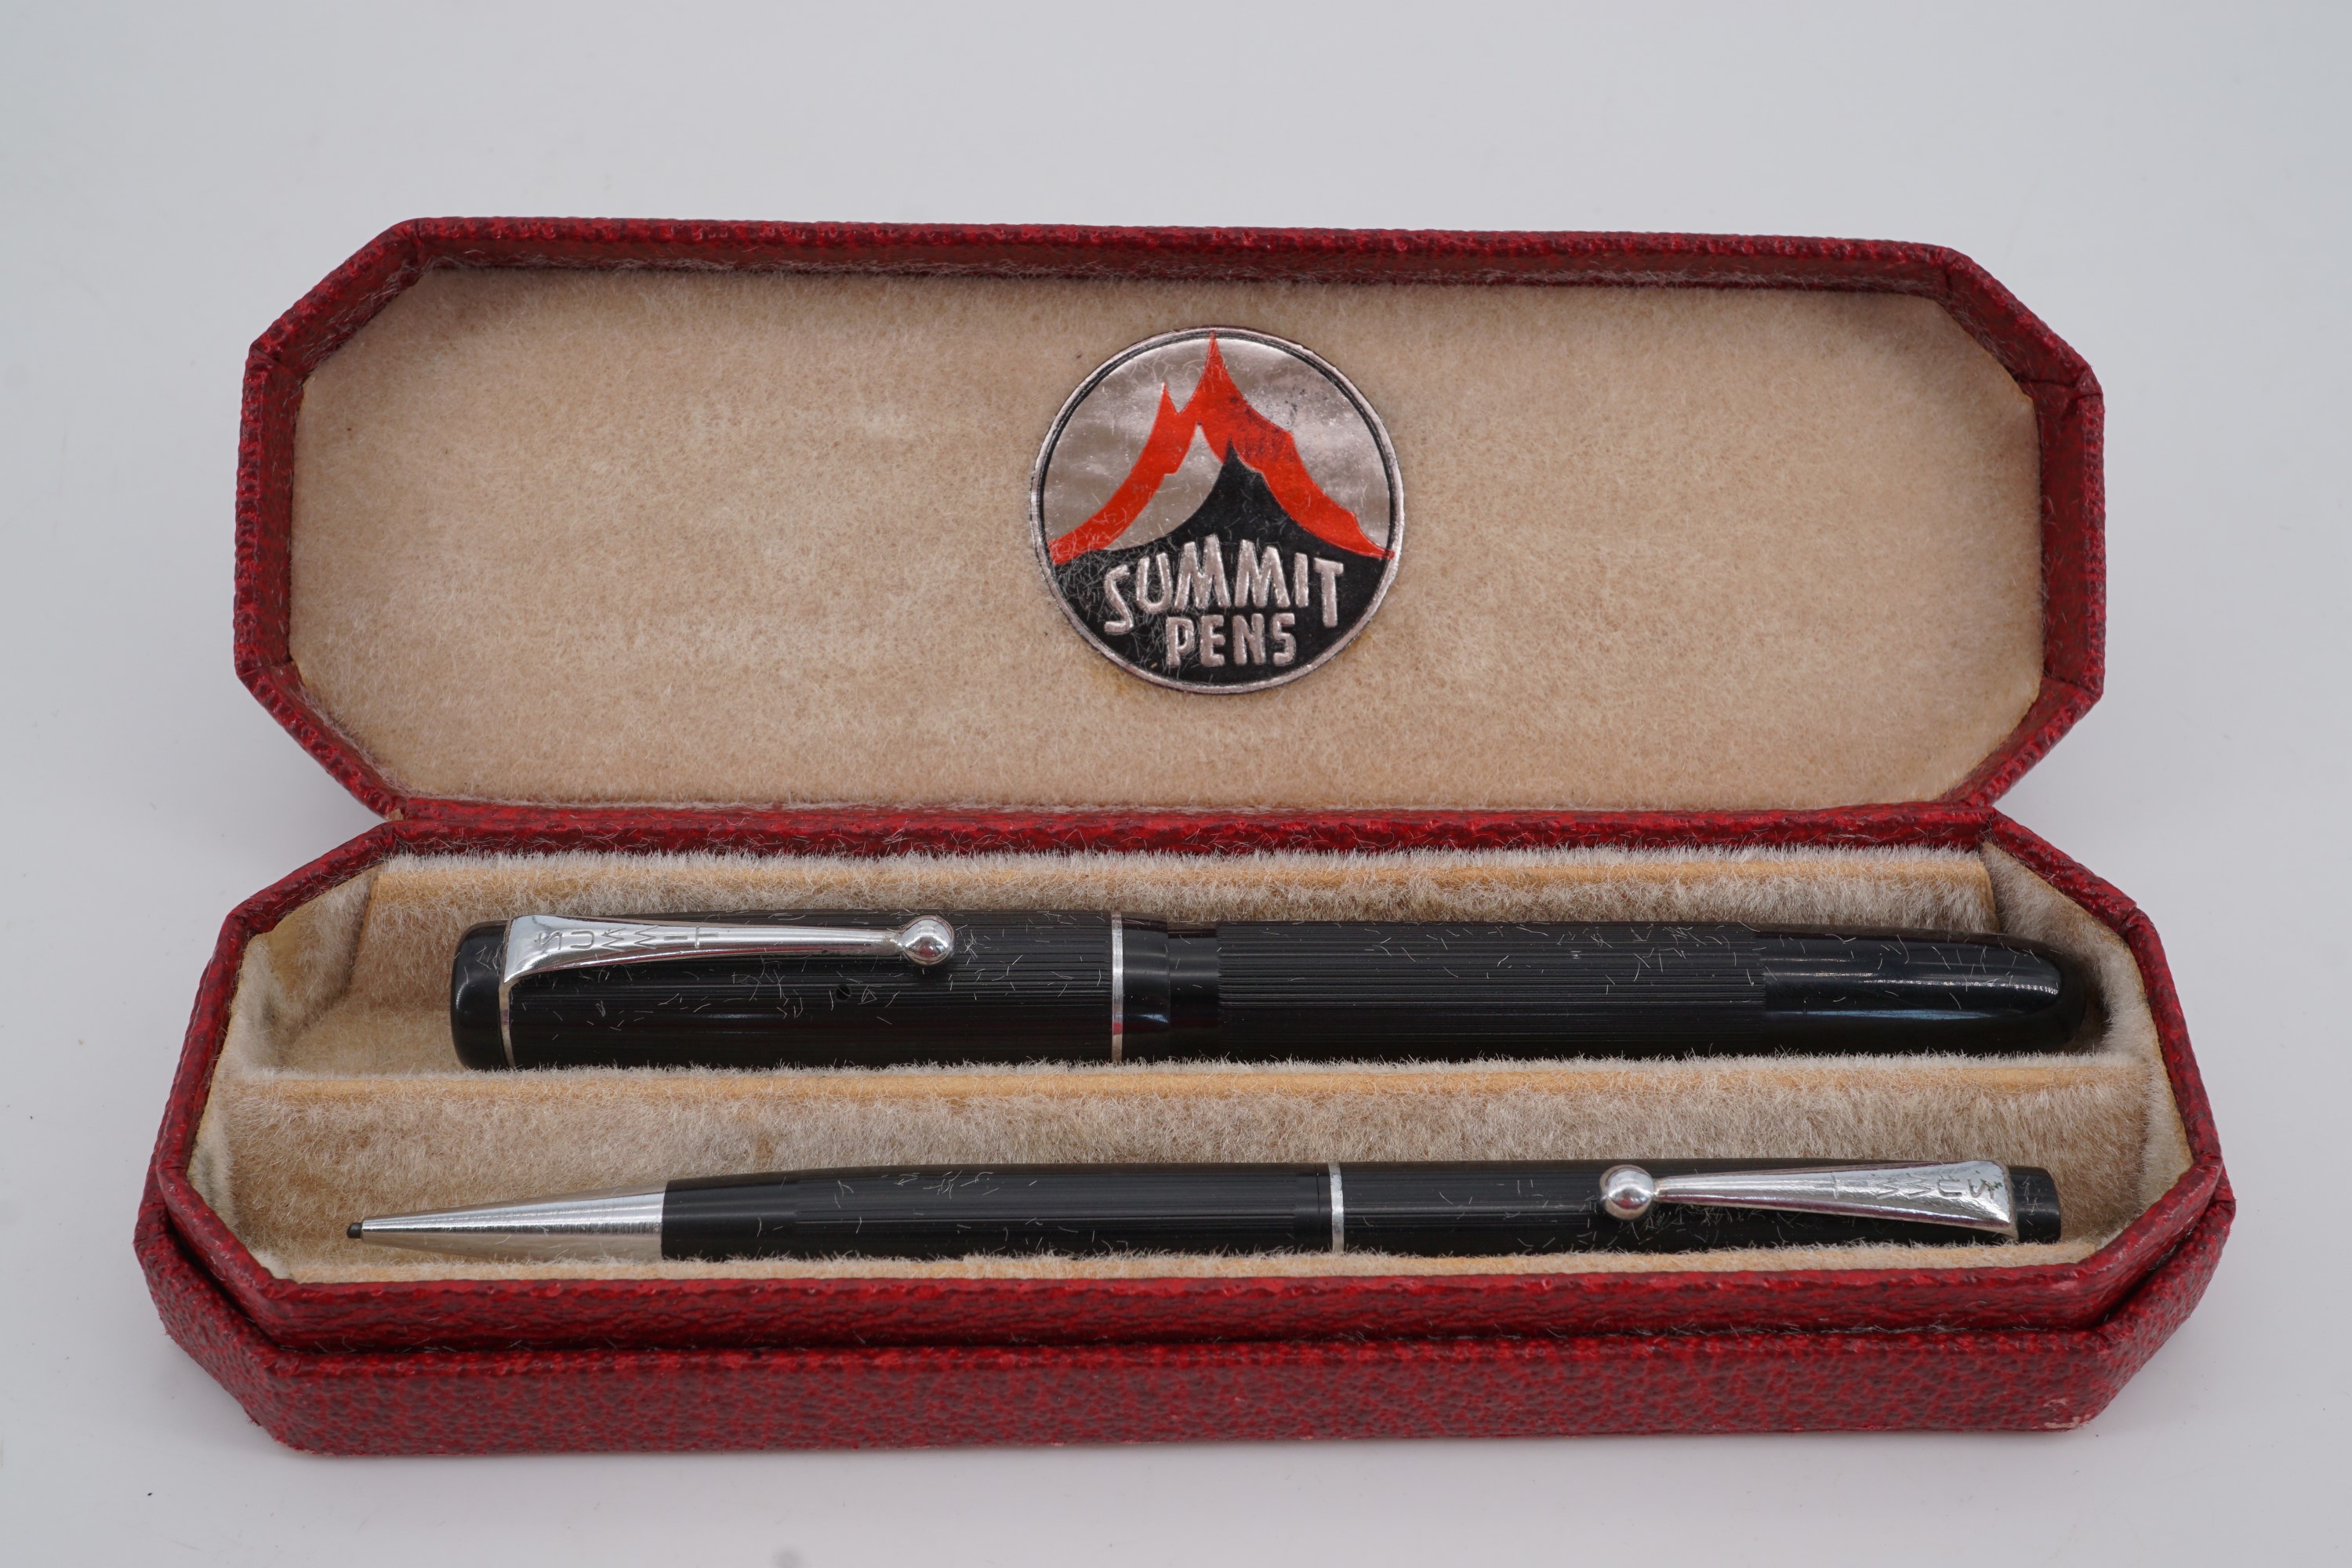 A 1920s cased Summit Cadet S100 fountain pen and propelling pencil set